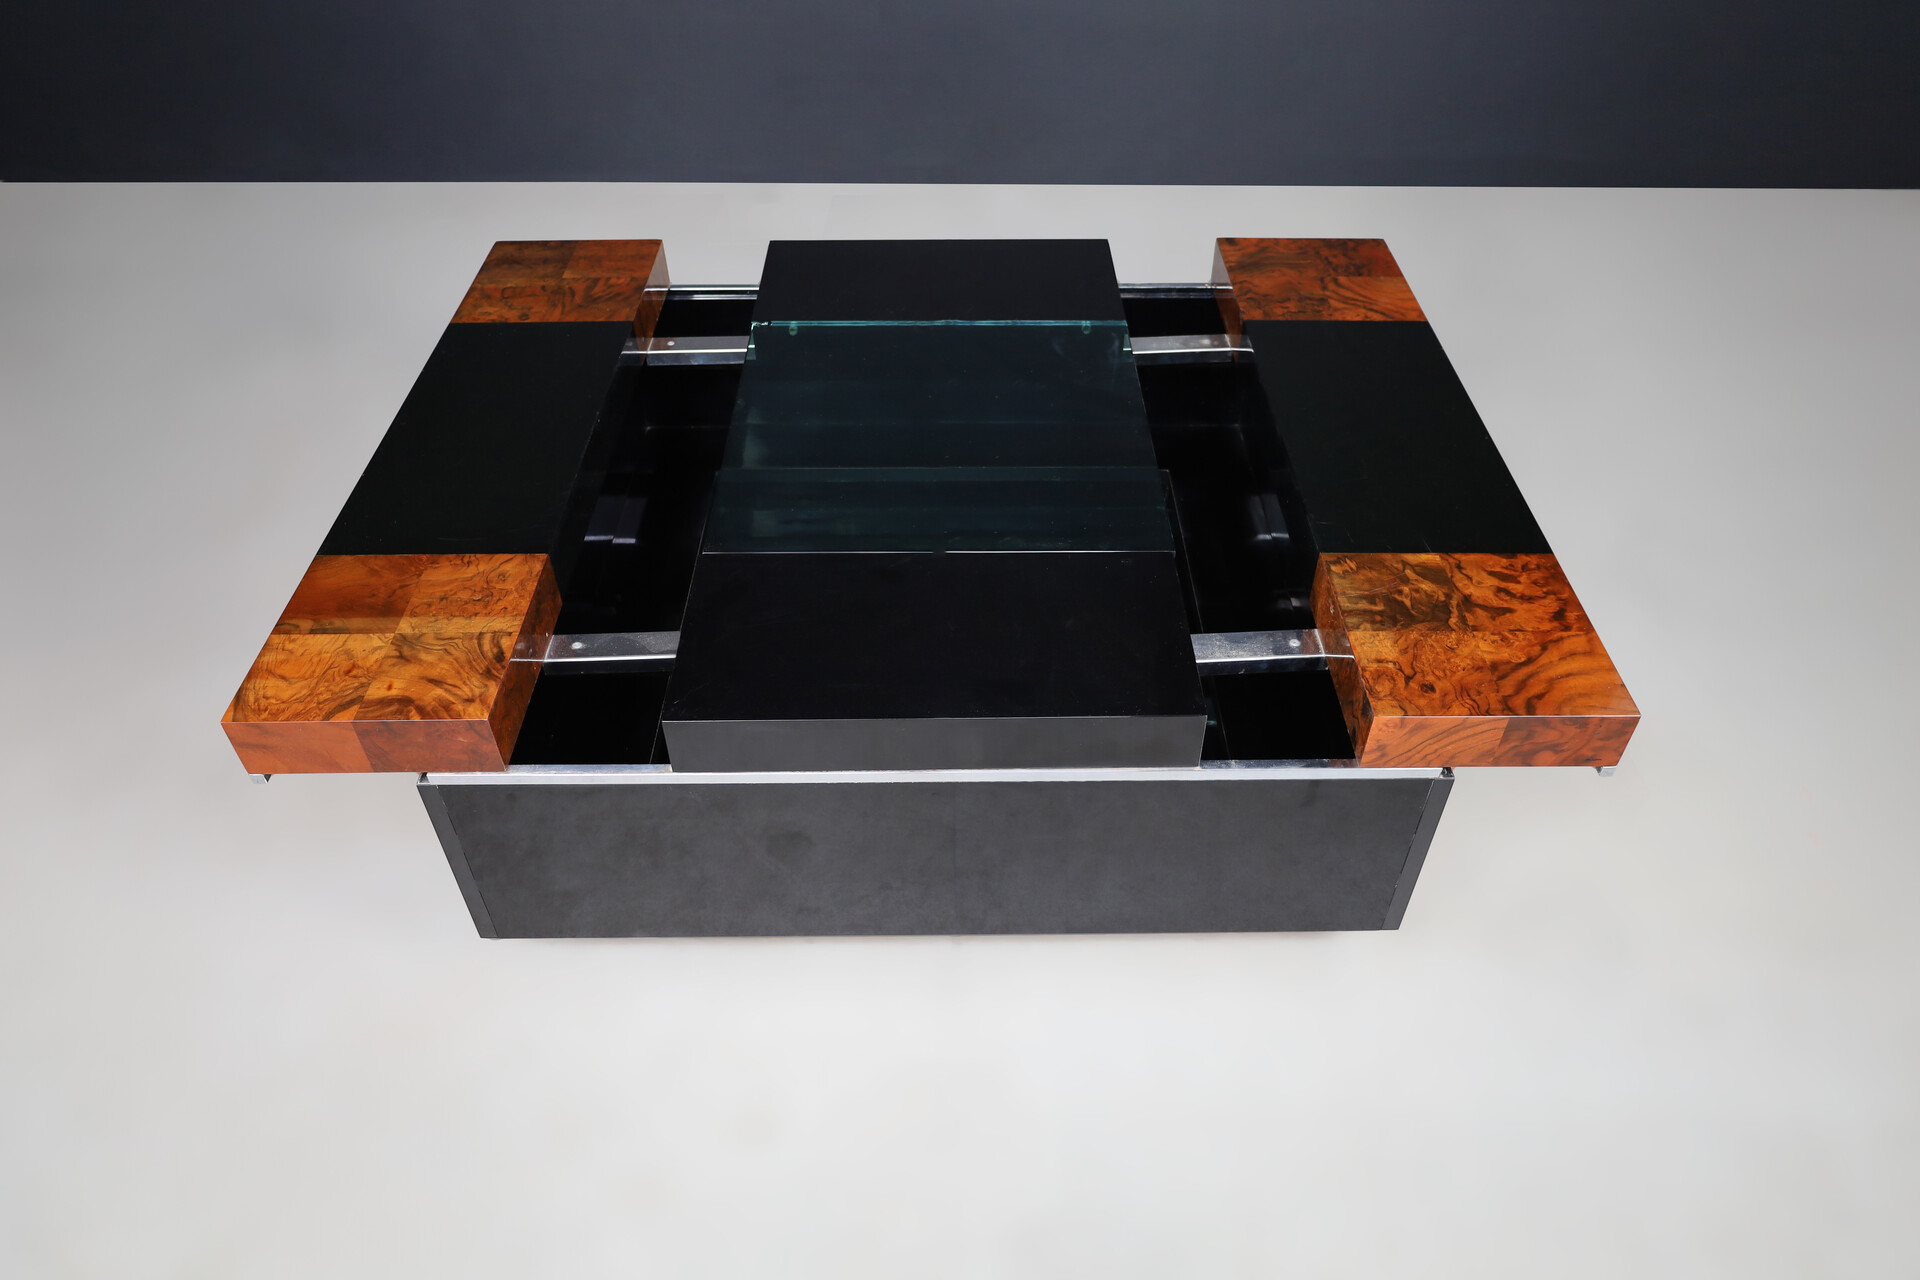 Mid century modern Willy Rizzo Lacquered and Glass Coffee Table Bar, for Sabot, circa 1970 Late-20th century